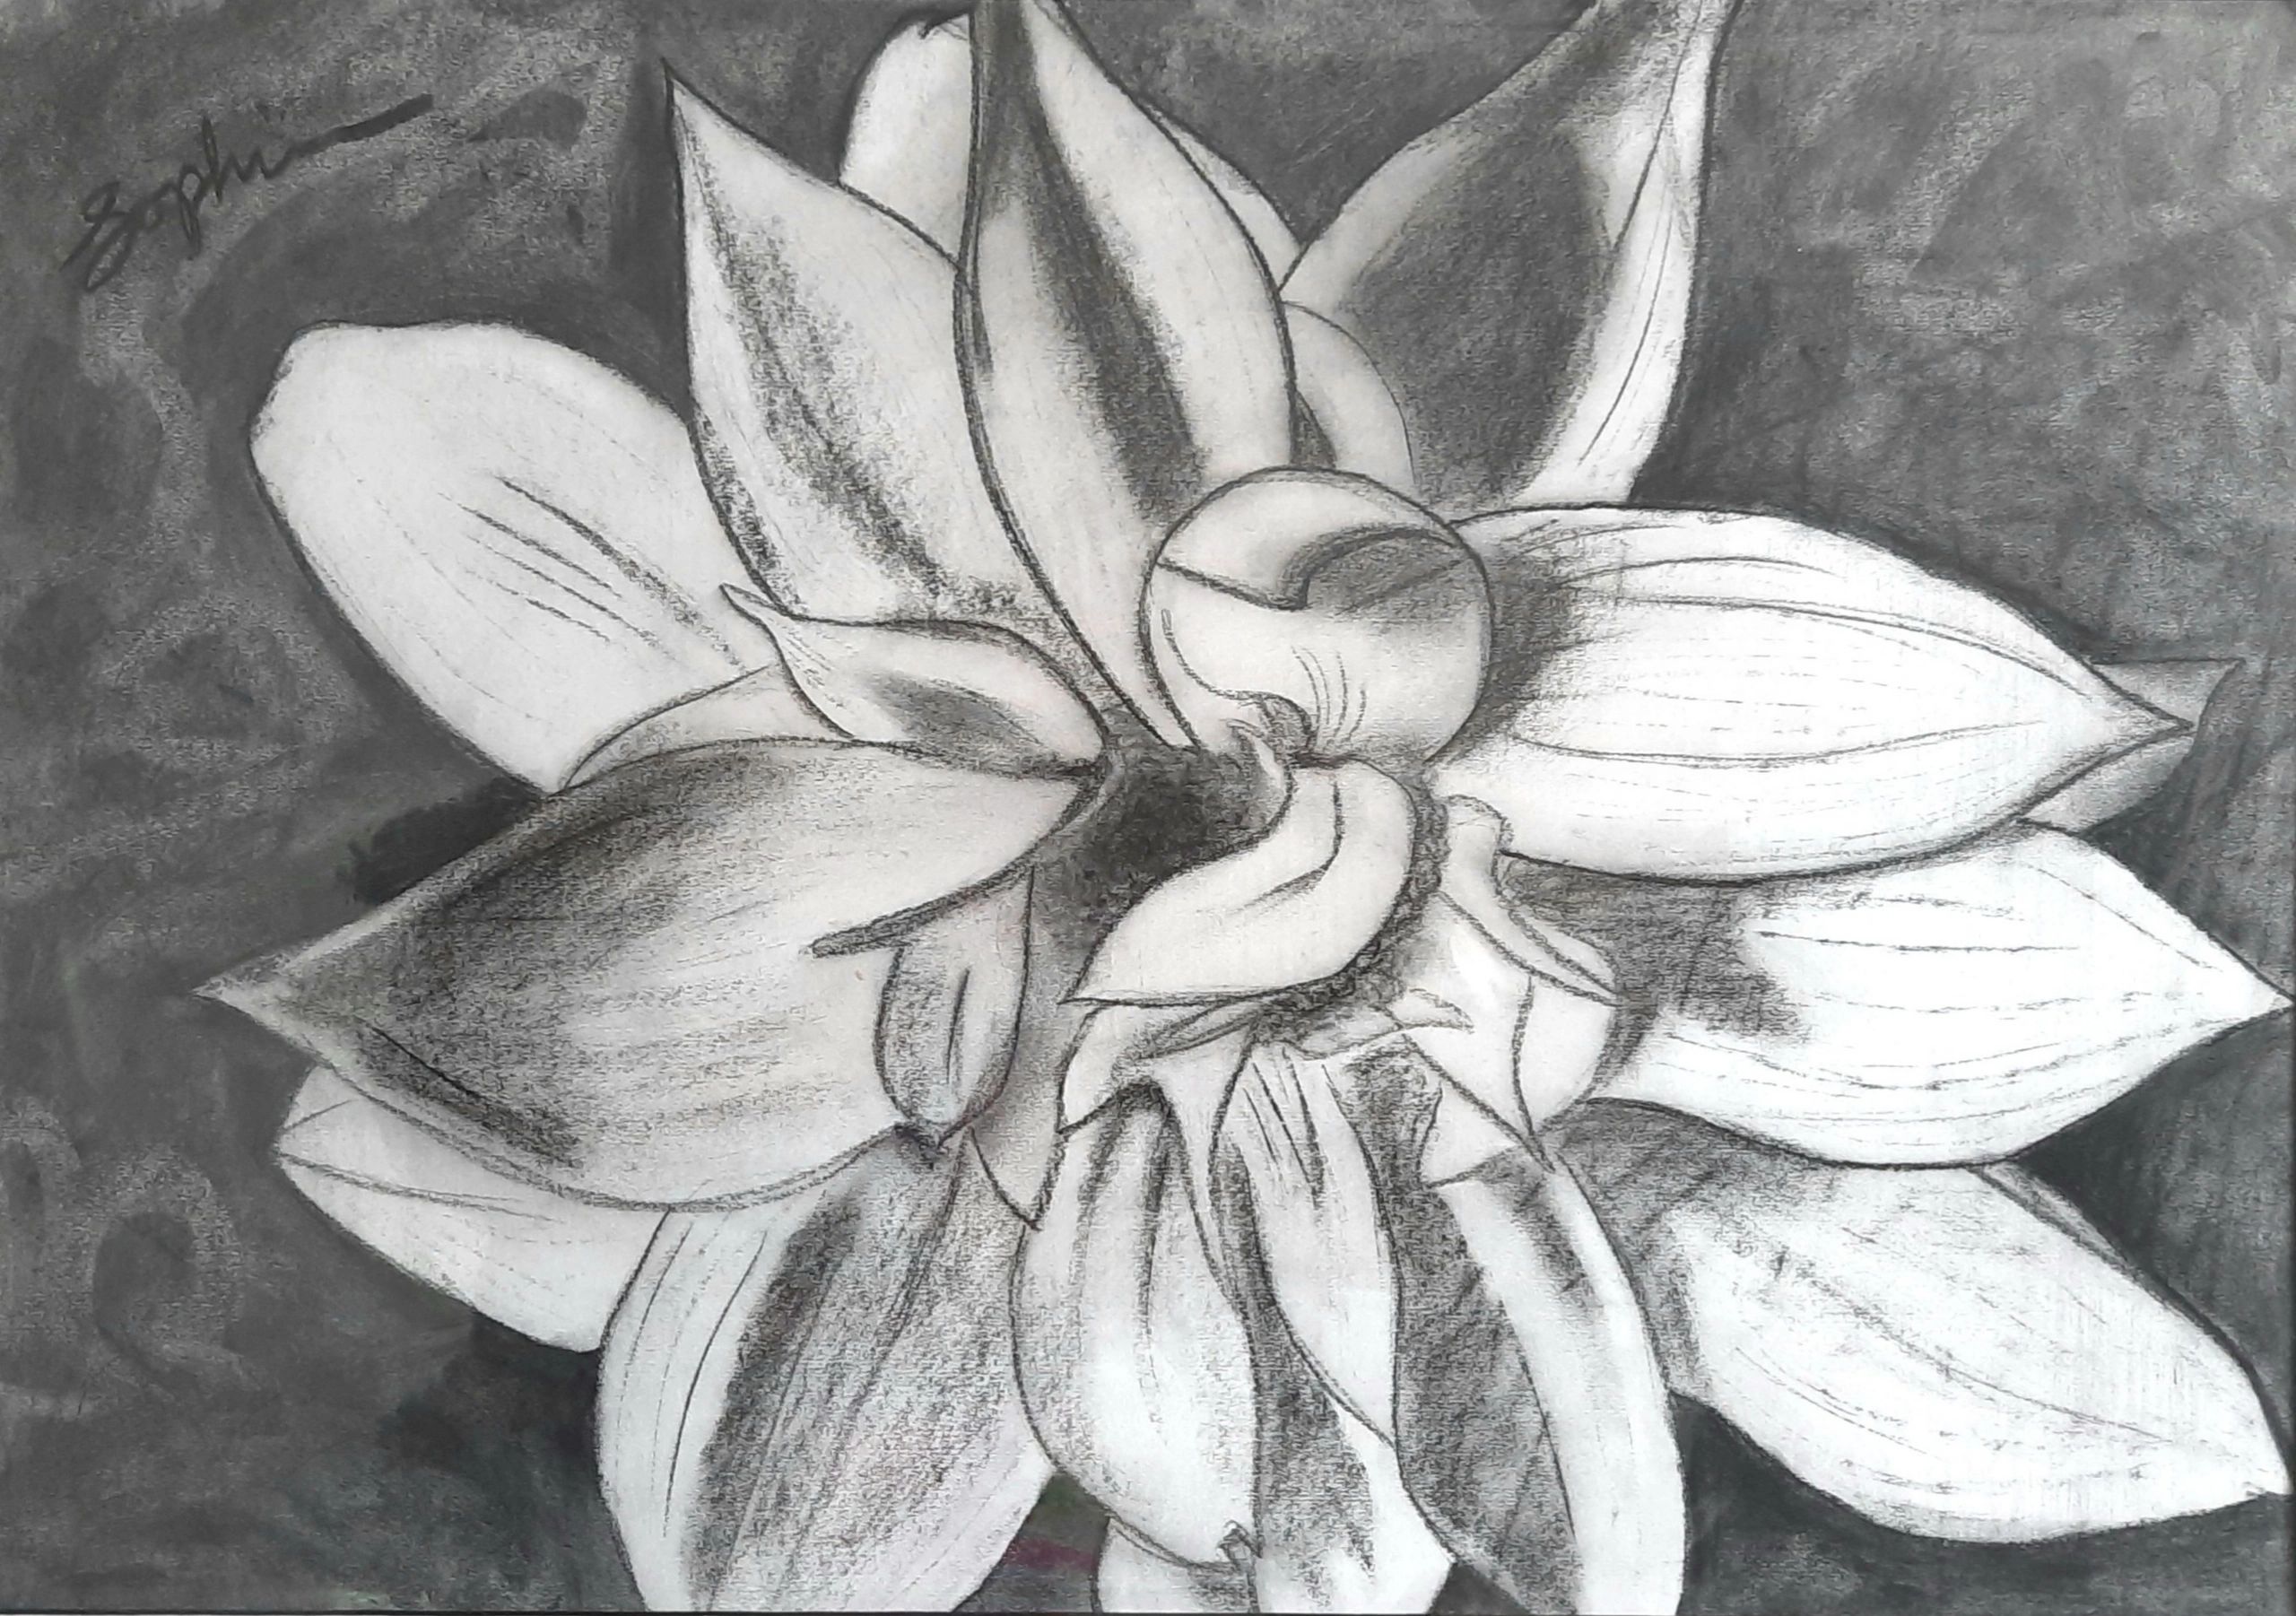 A large unfurling charcoal flower on paper.